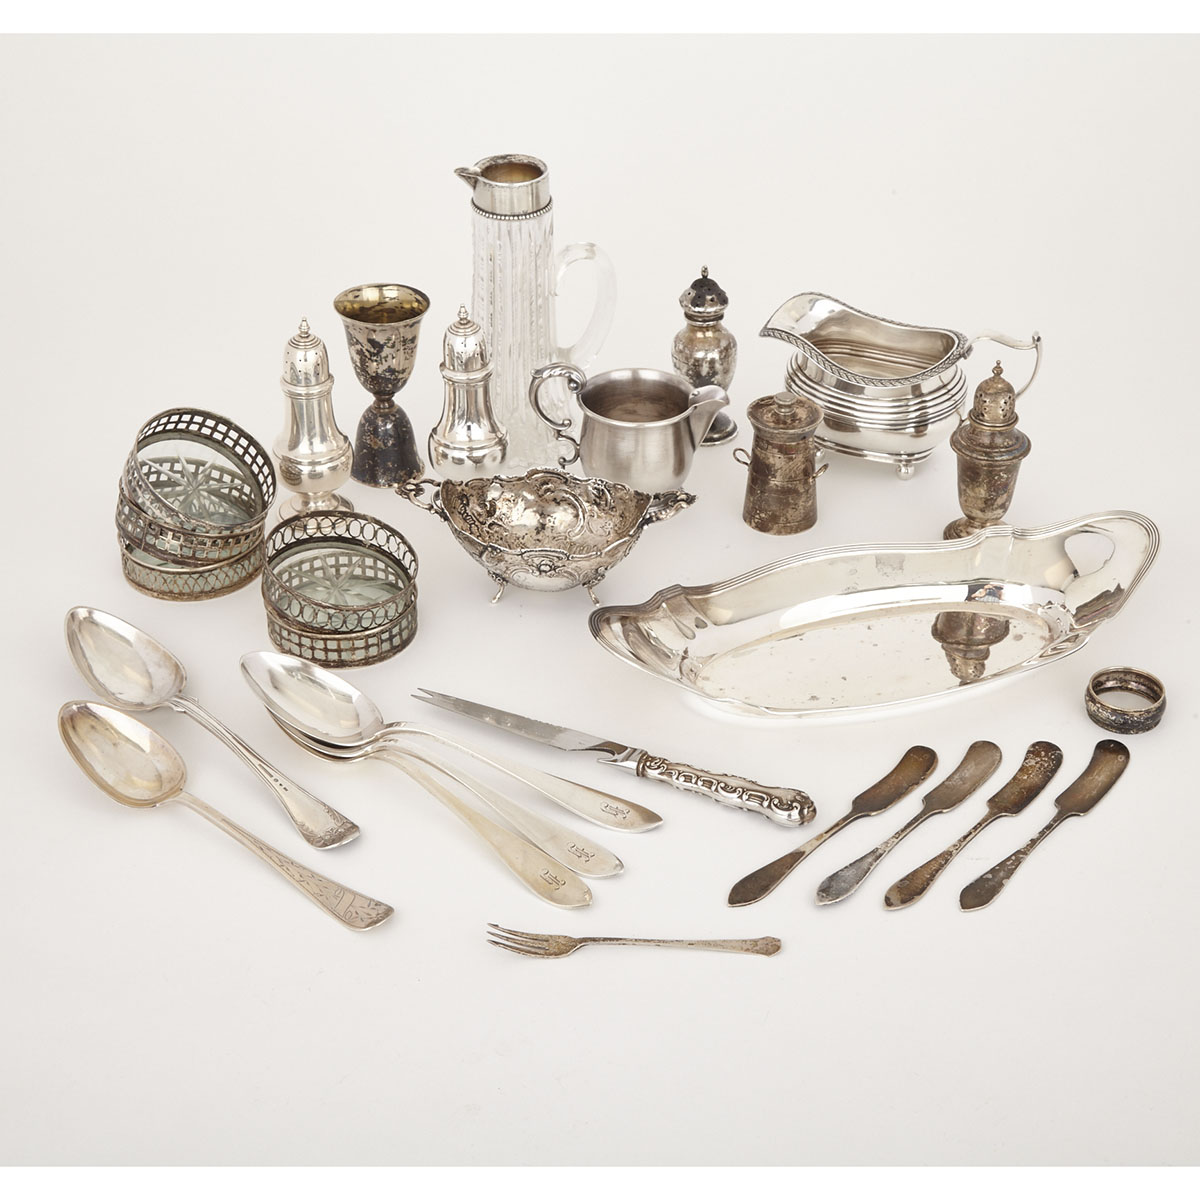 Grouped Lot of English, Continental and North American Silver, 19th/20th century